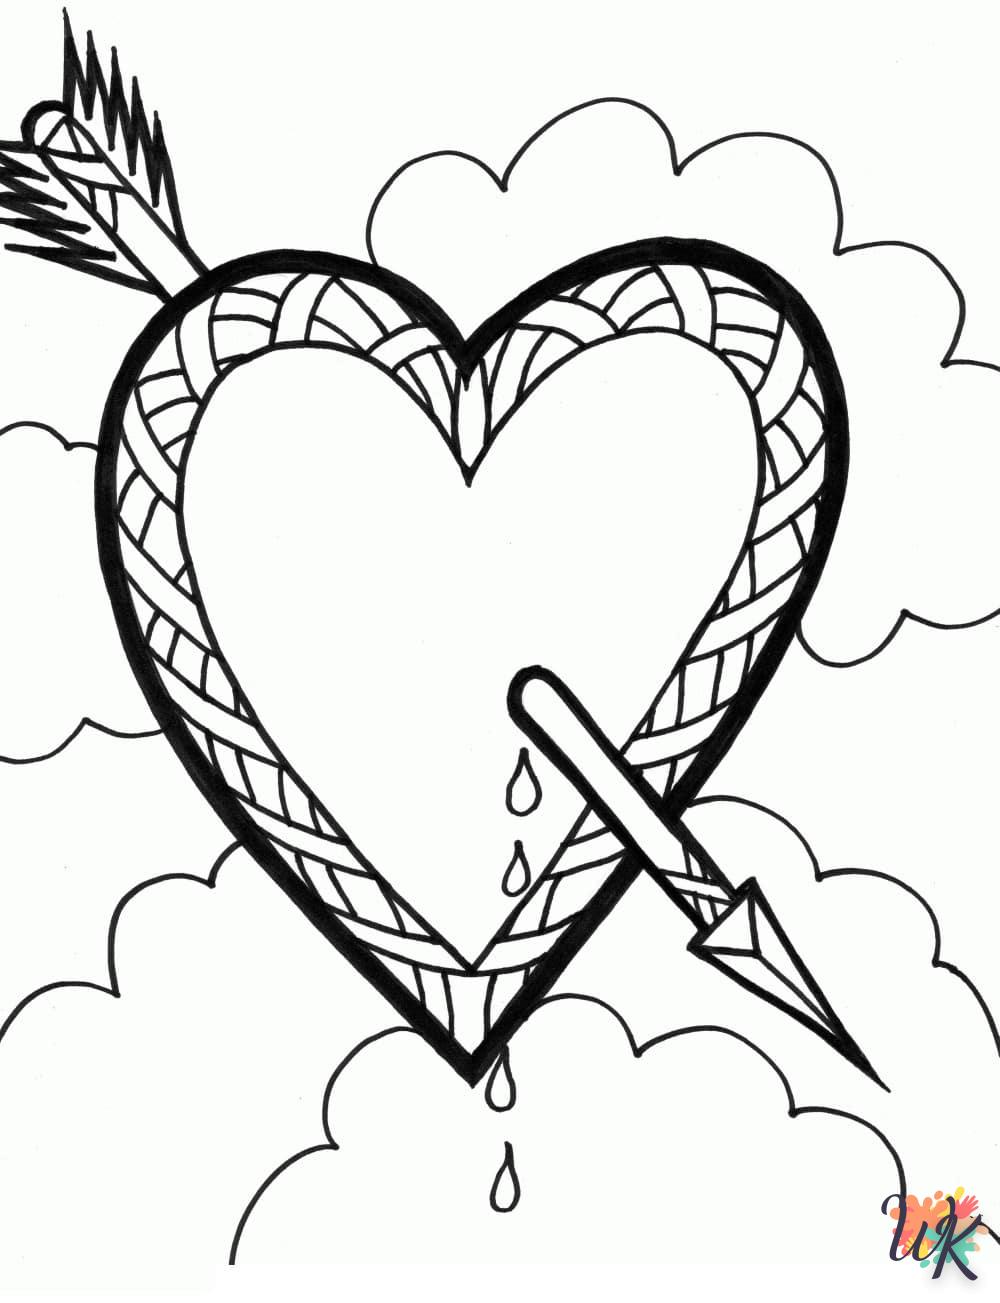 Heart coloring page to print for 2 year olds